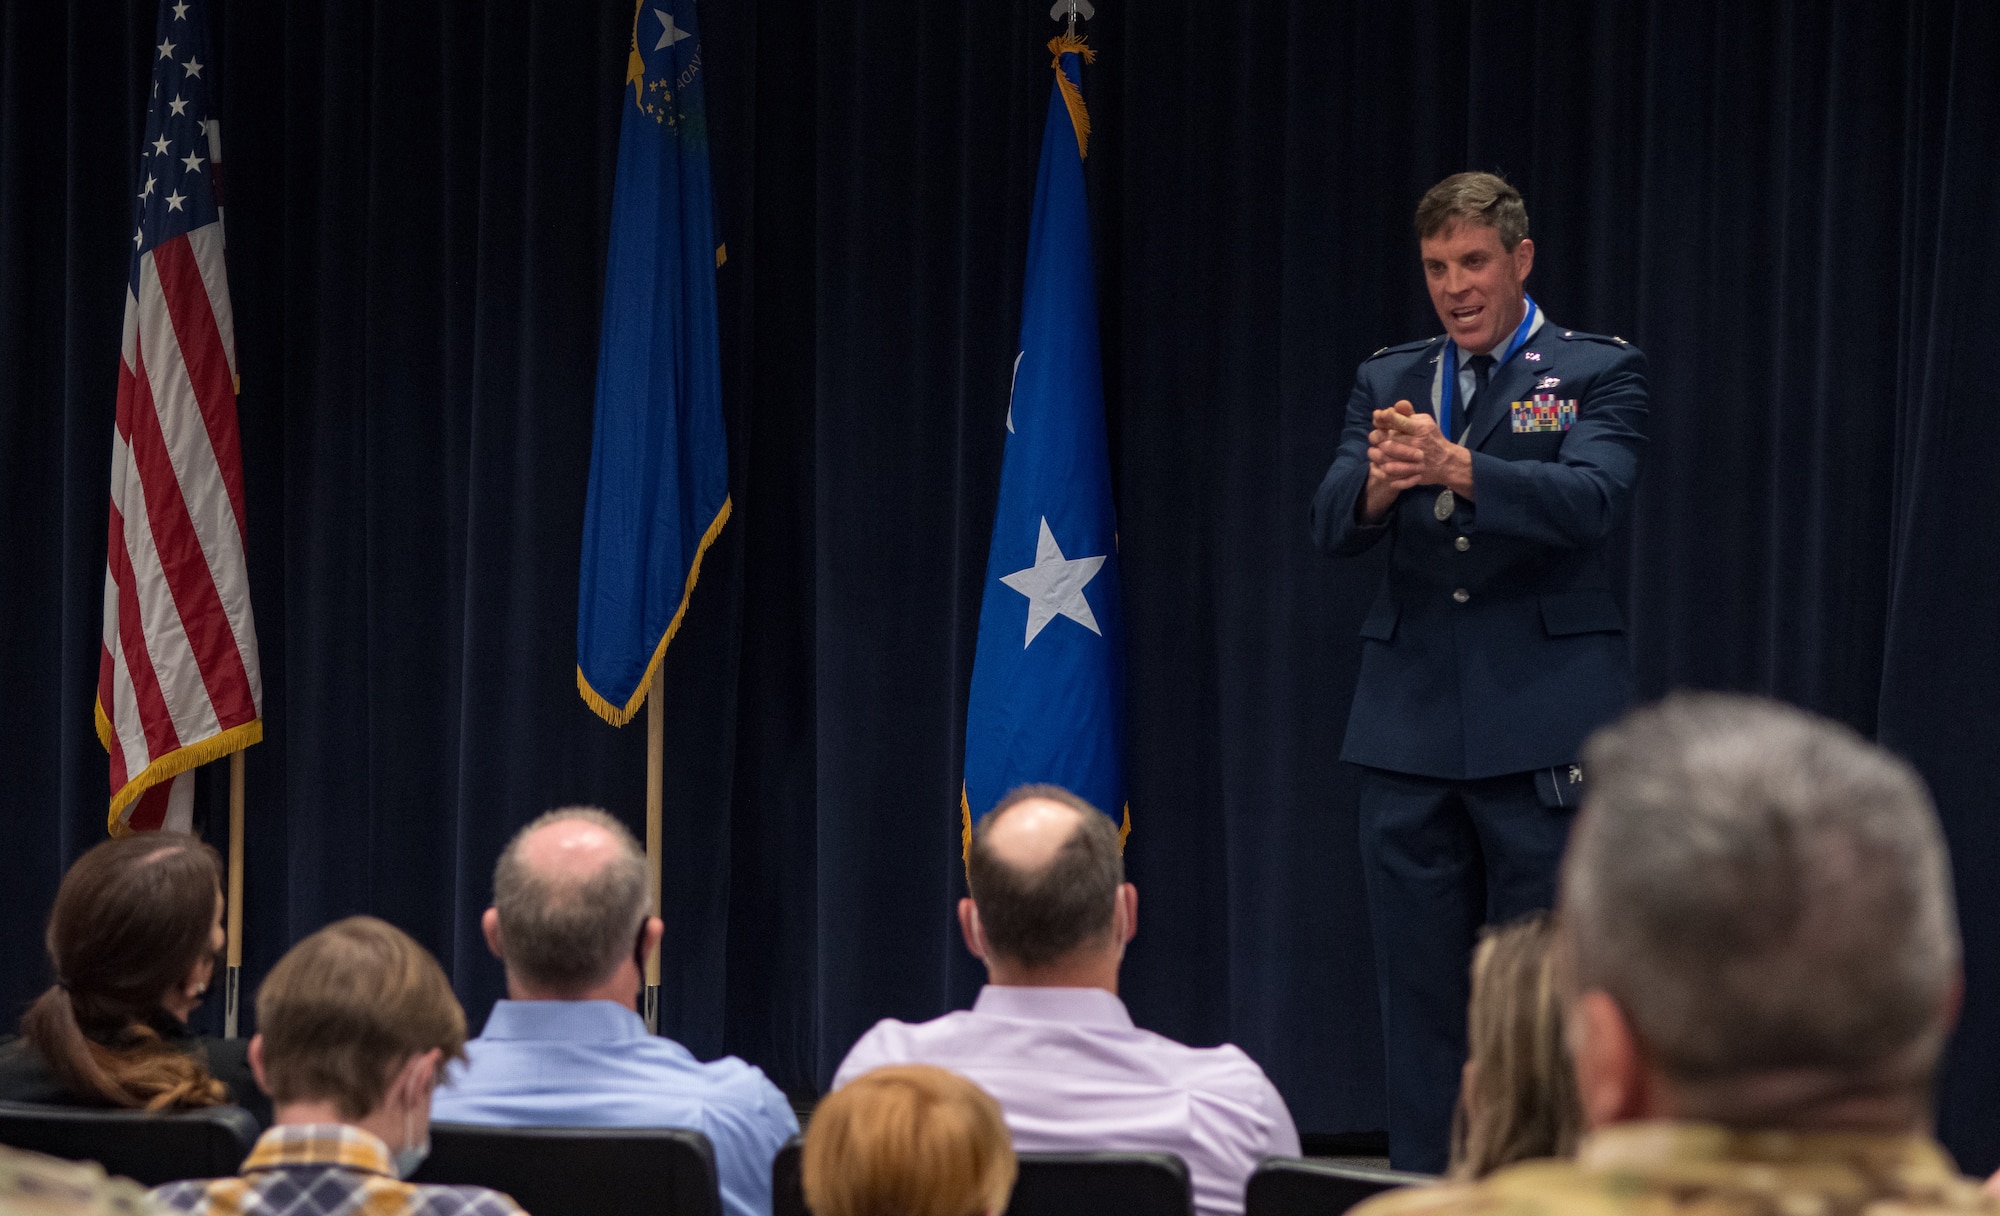 Col. David Clark, special projects officer with the Nevada National Guard State Headquarters, addresses those in attendance of an award ceremony after he was presented with the Maj. Gen. Drennan A. Clark Order of Nevada Medal.